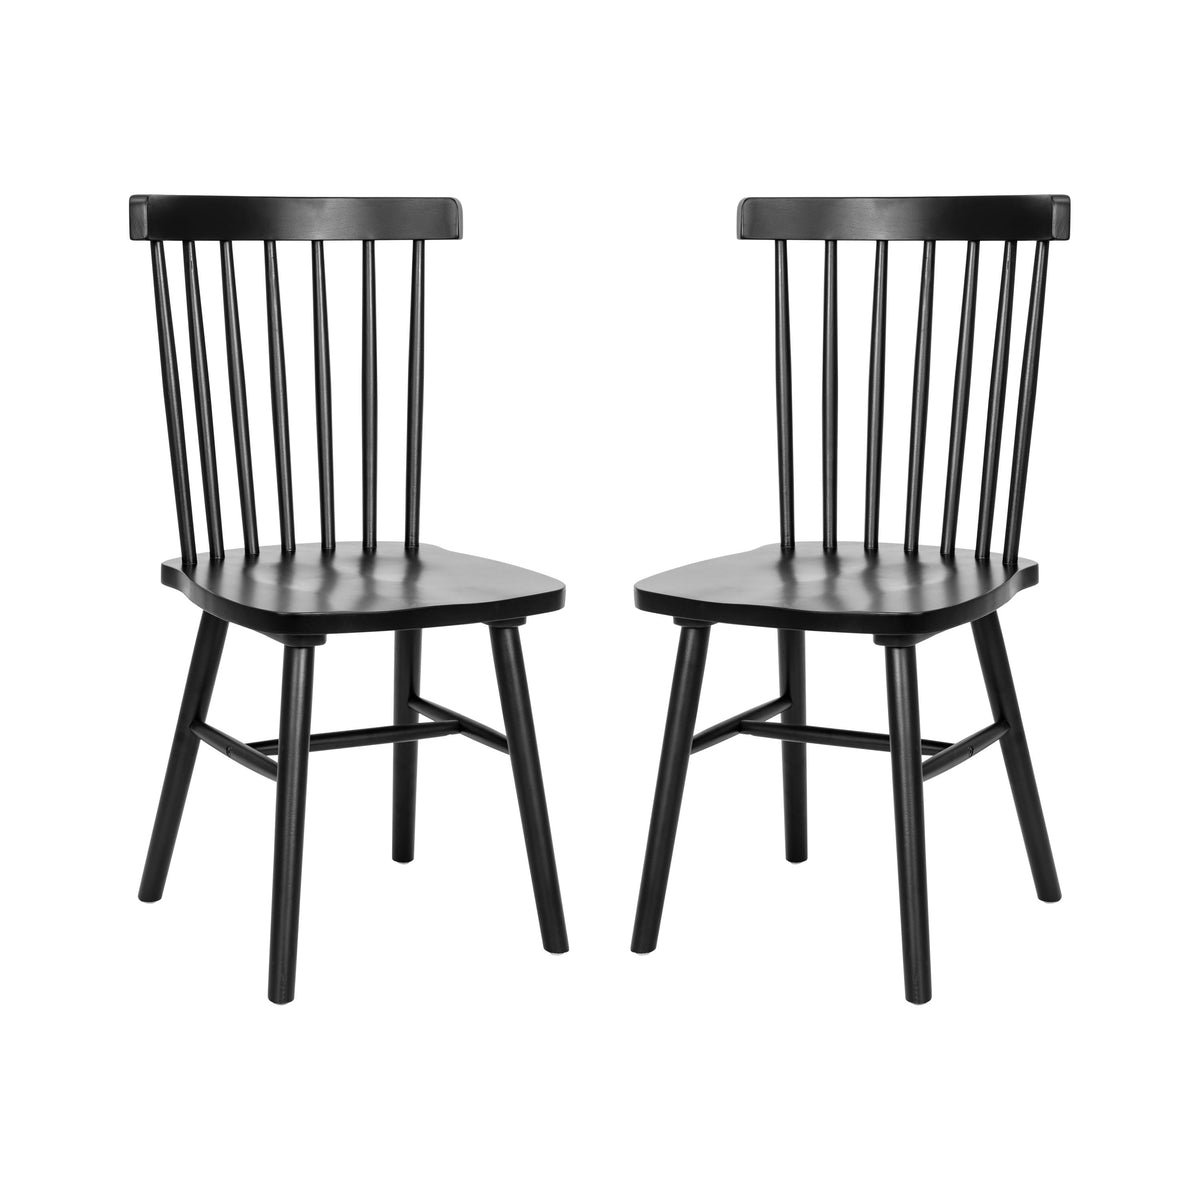 Black |#| Windsor Style Commercial Solid Wood Spindle Back Dining Chairs in Black-Set of 2